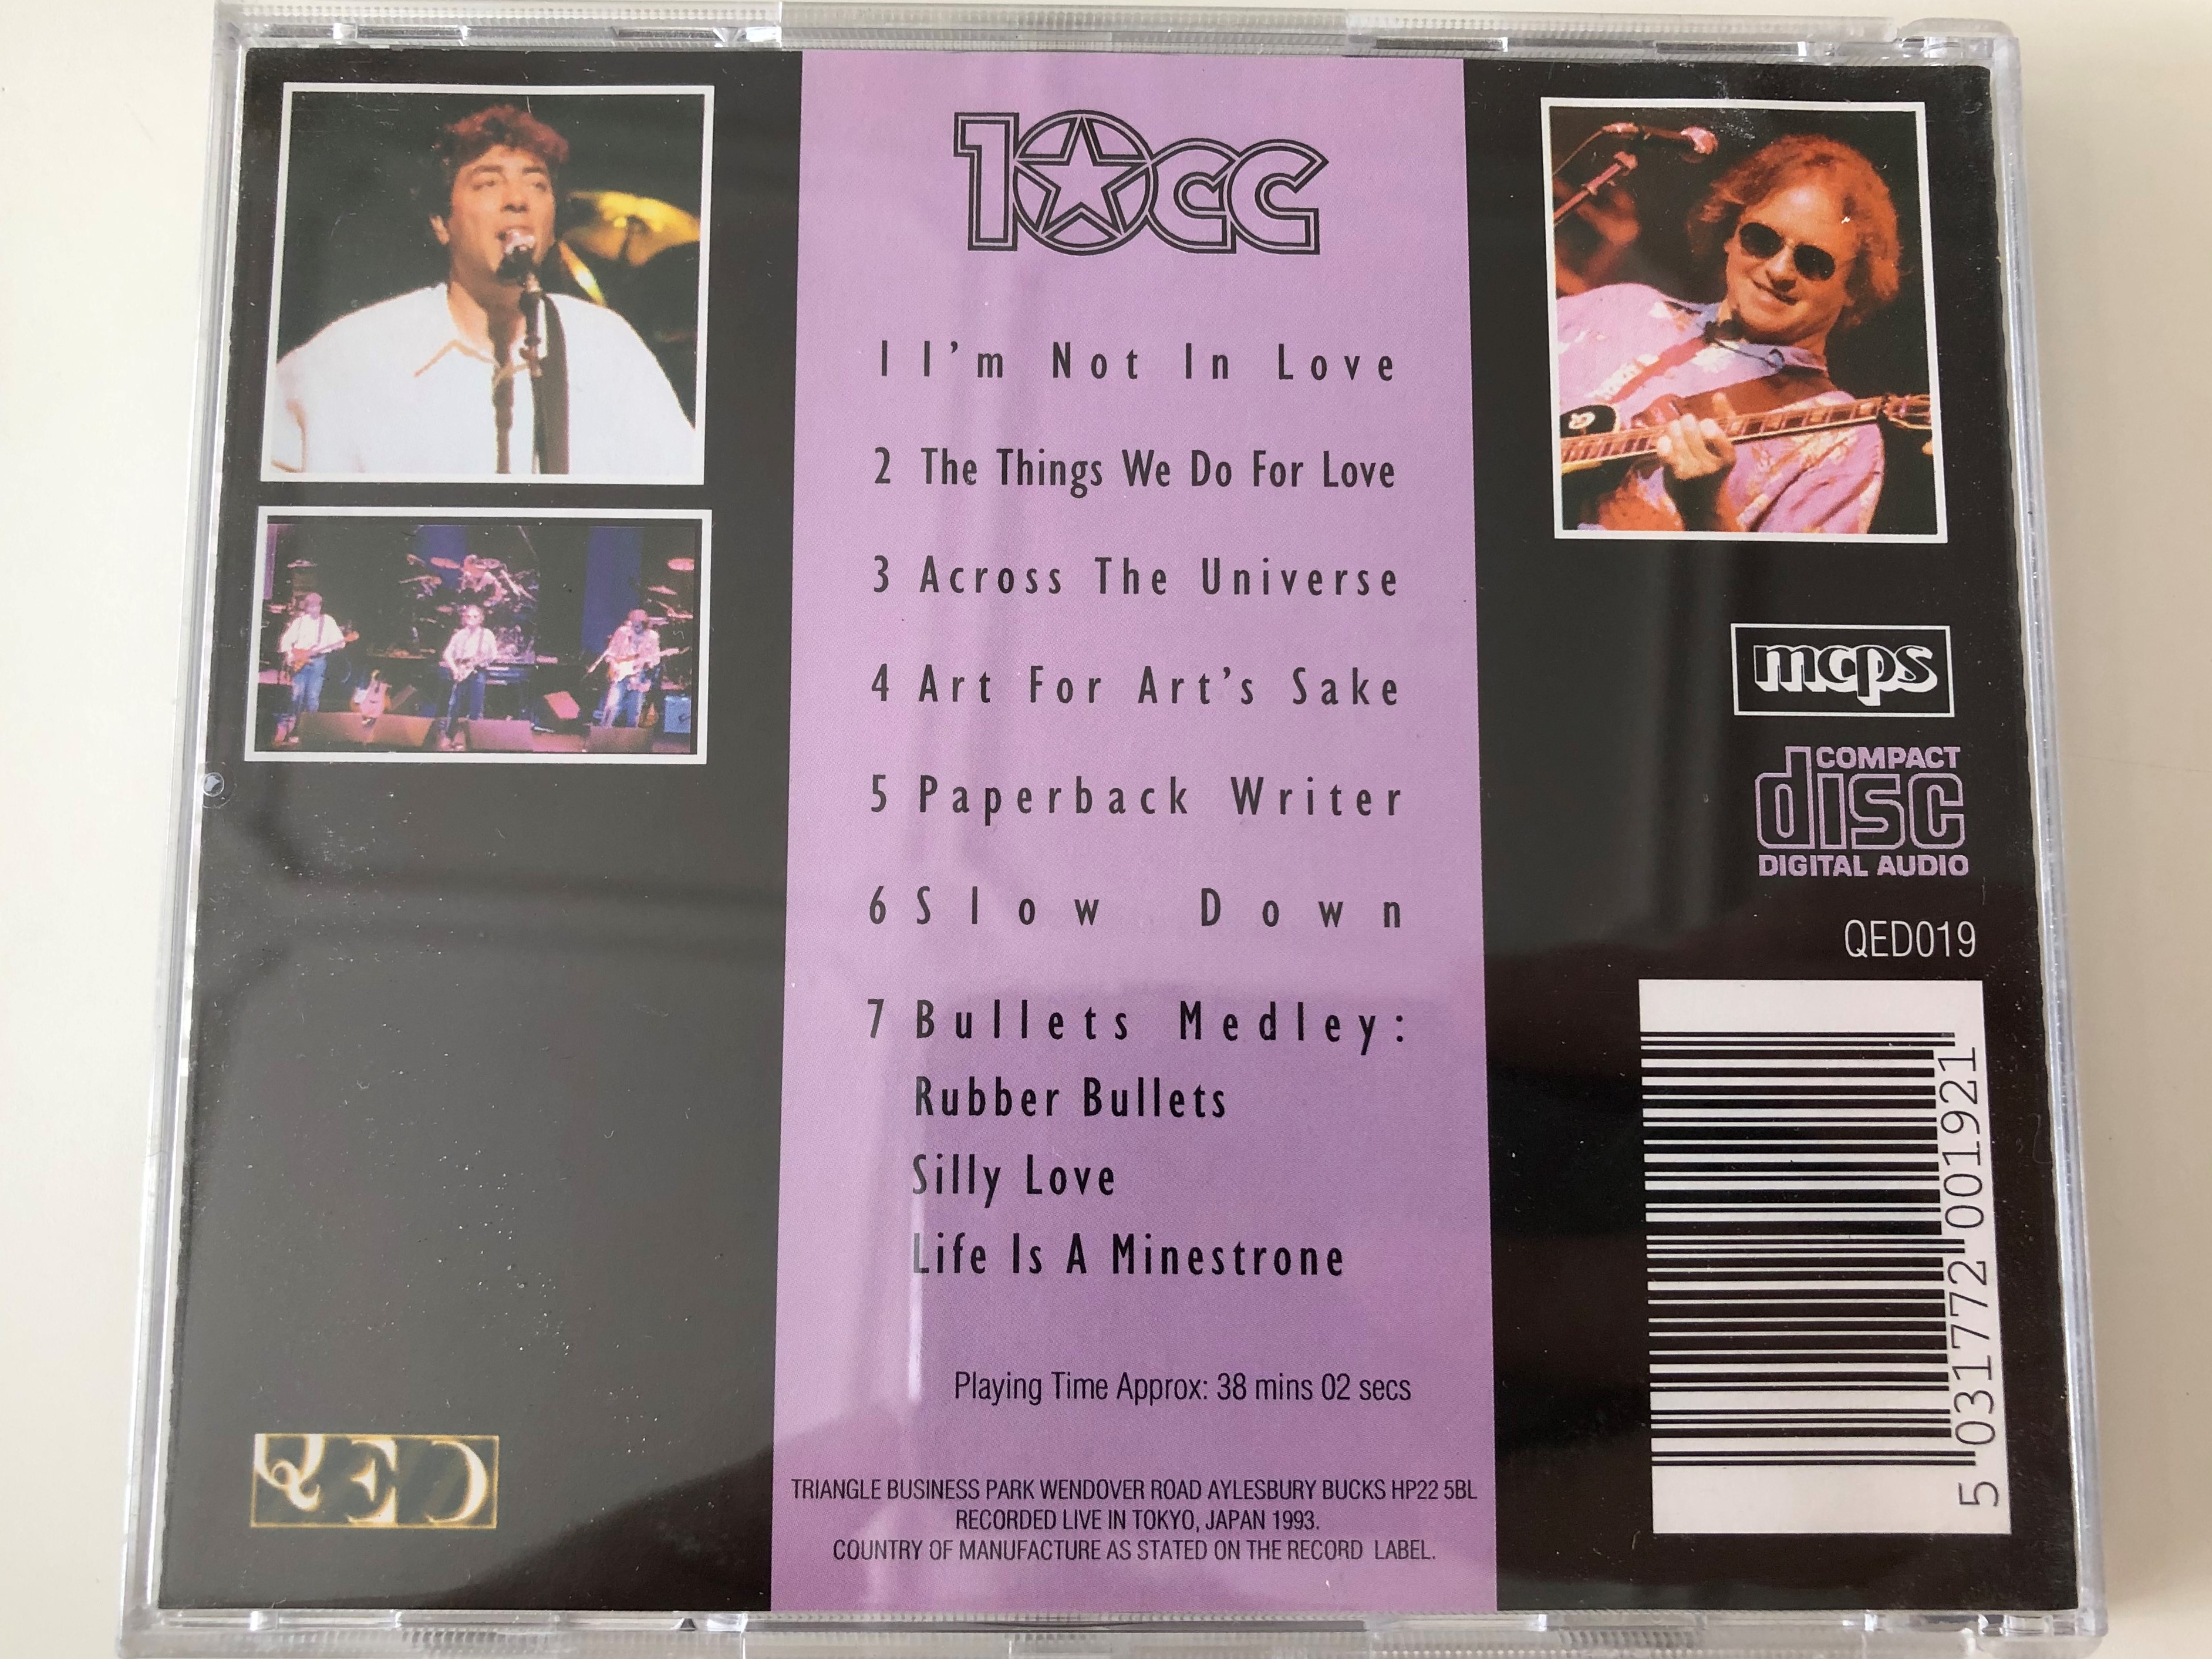 live-in-concert-volume-two-10cc-qed-audio-cd-qed019-4-.jpg